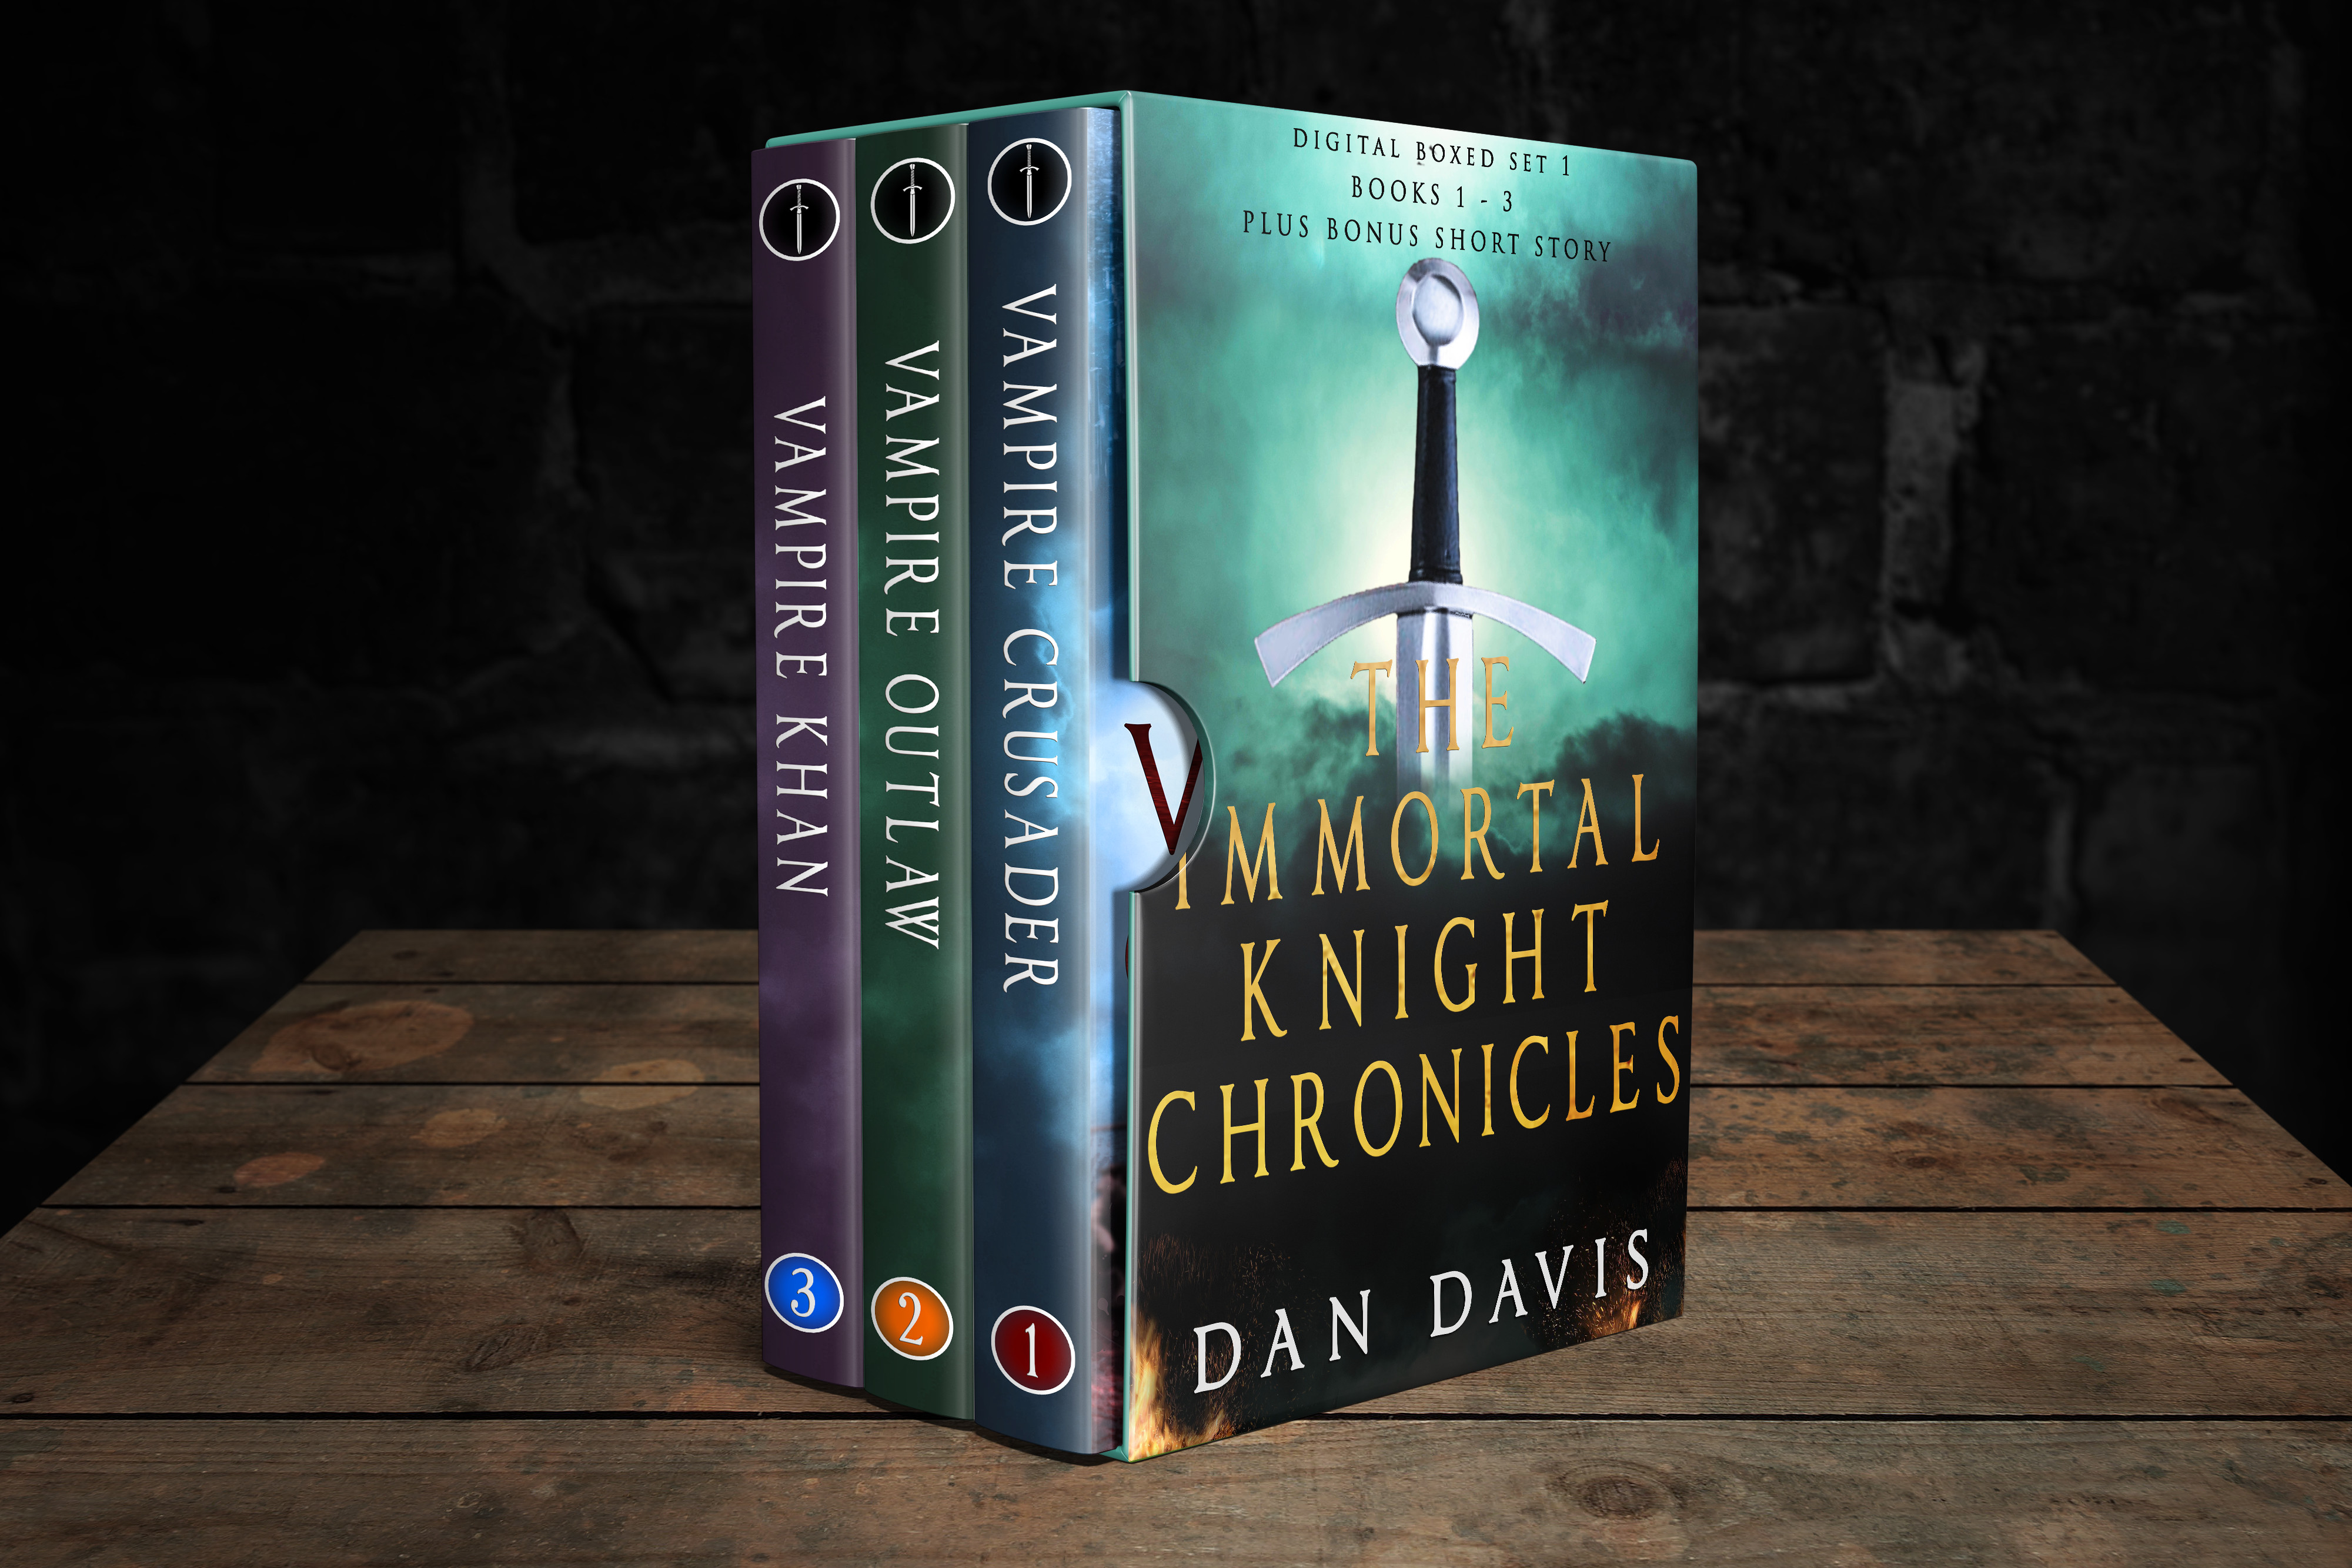 On sale now – the Immortal Knight Chronicles Box Set